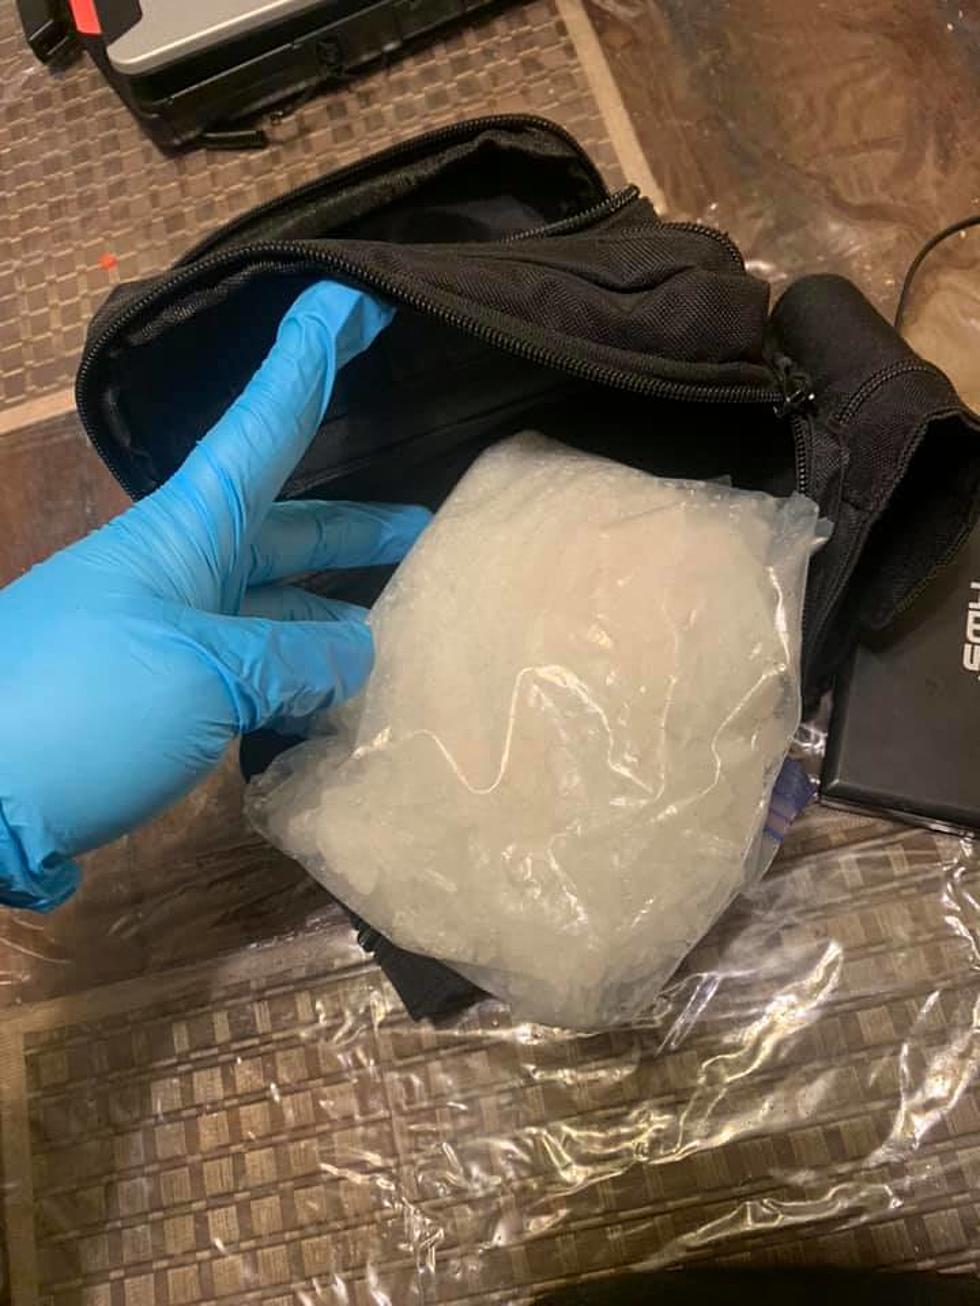 Adams County Search Turns Up Pound of Meth & Stolen Goods